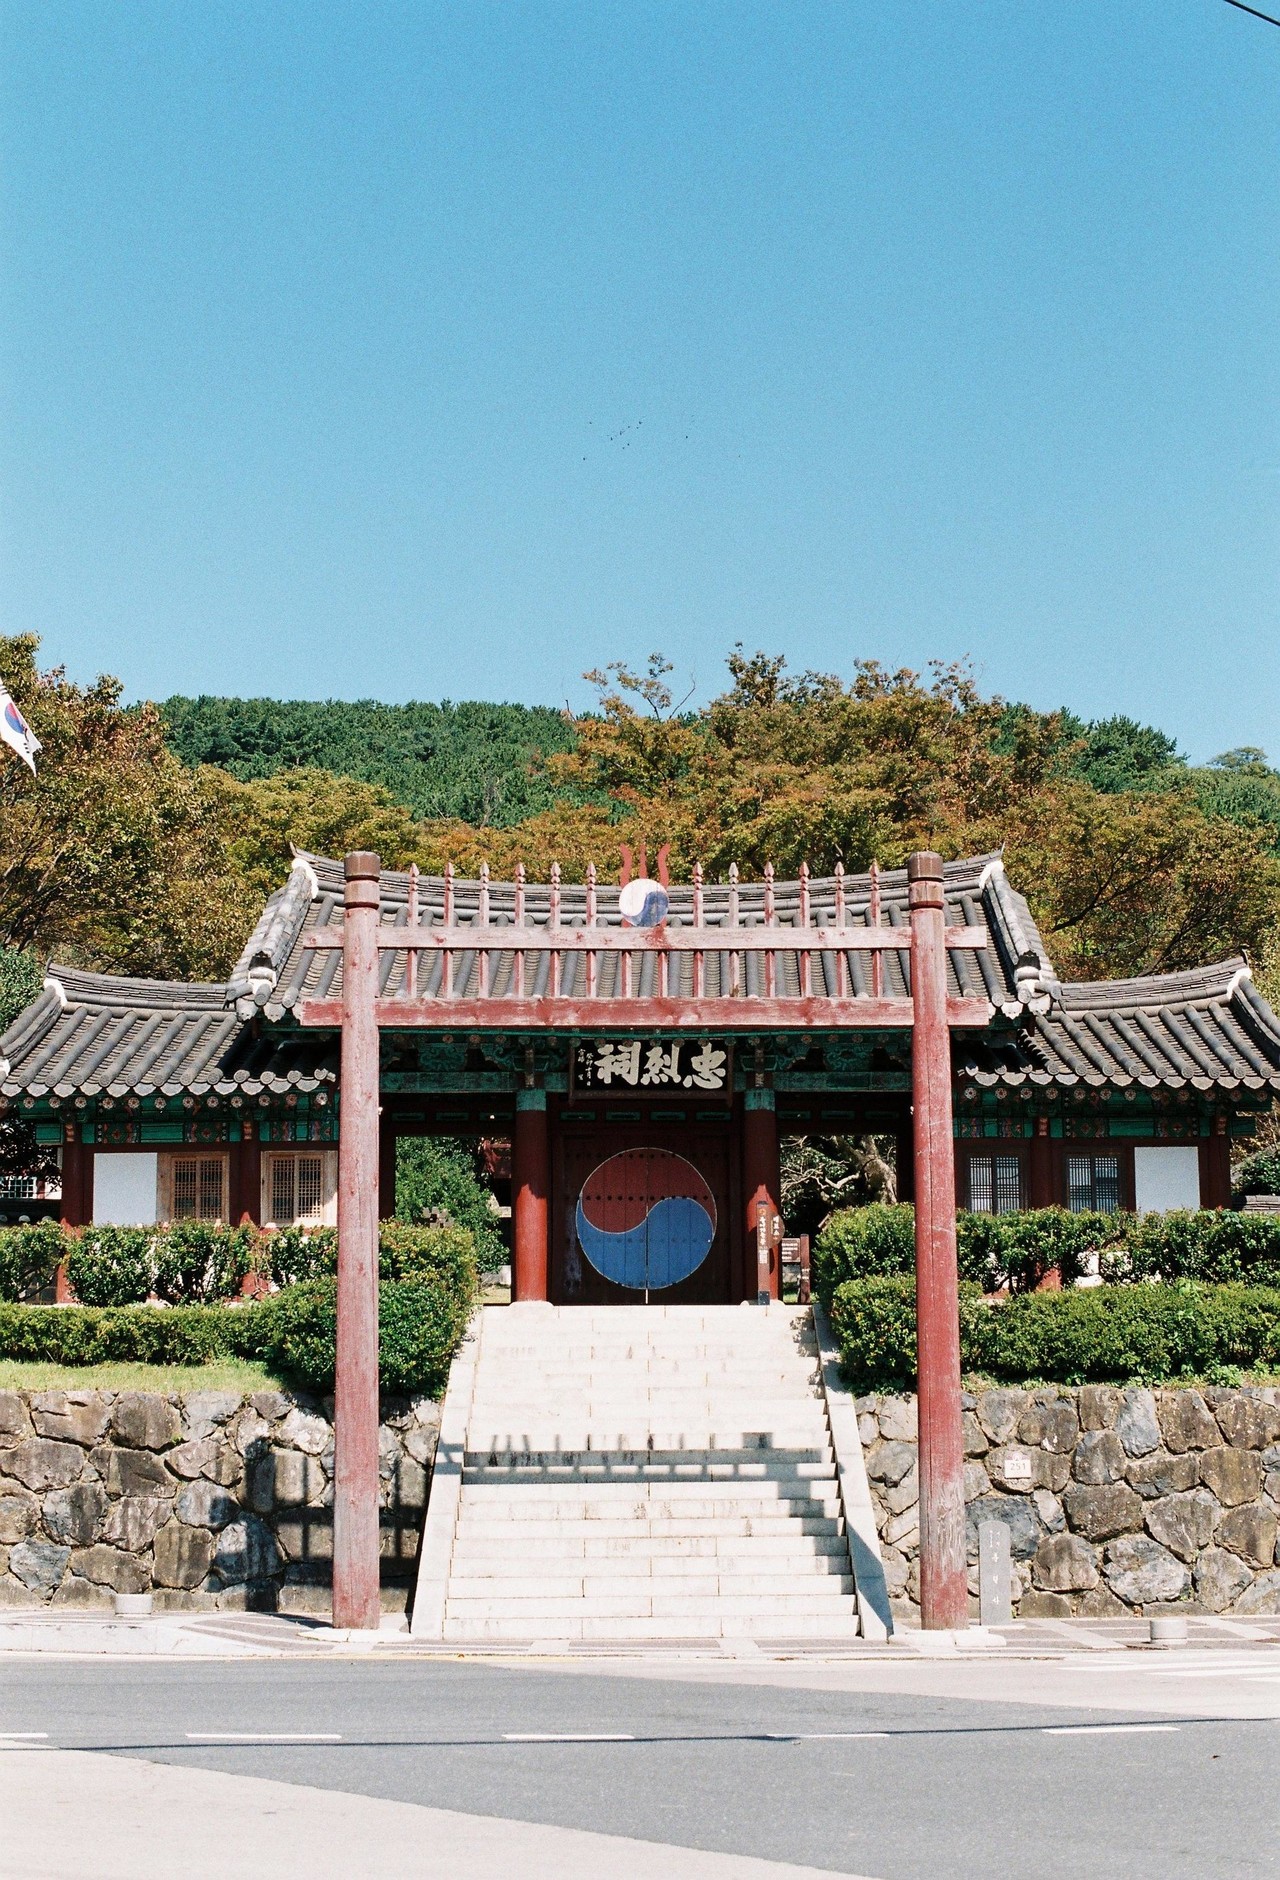 <span style="color: rgb(102, 102, 102); font-size: 11px; border-bottom:1px solid #999;">달달해서 단팥죽</span>